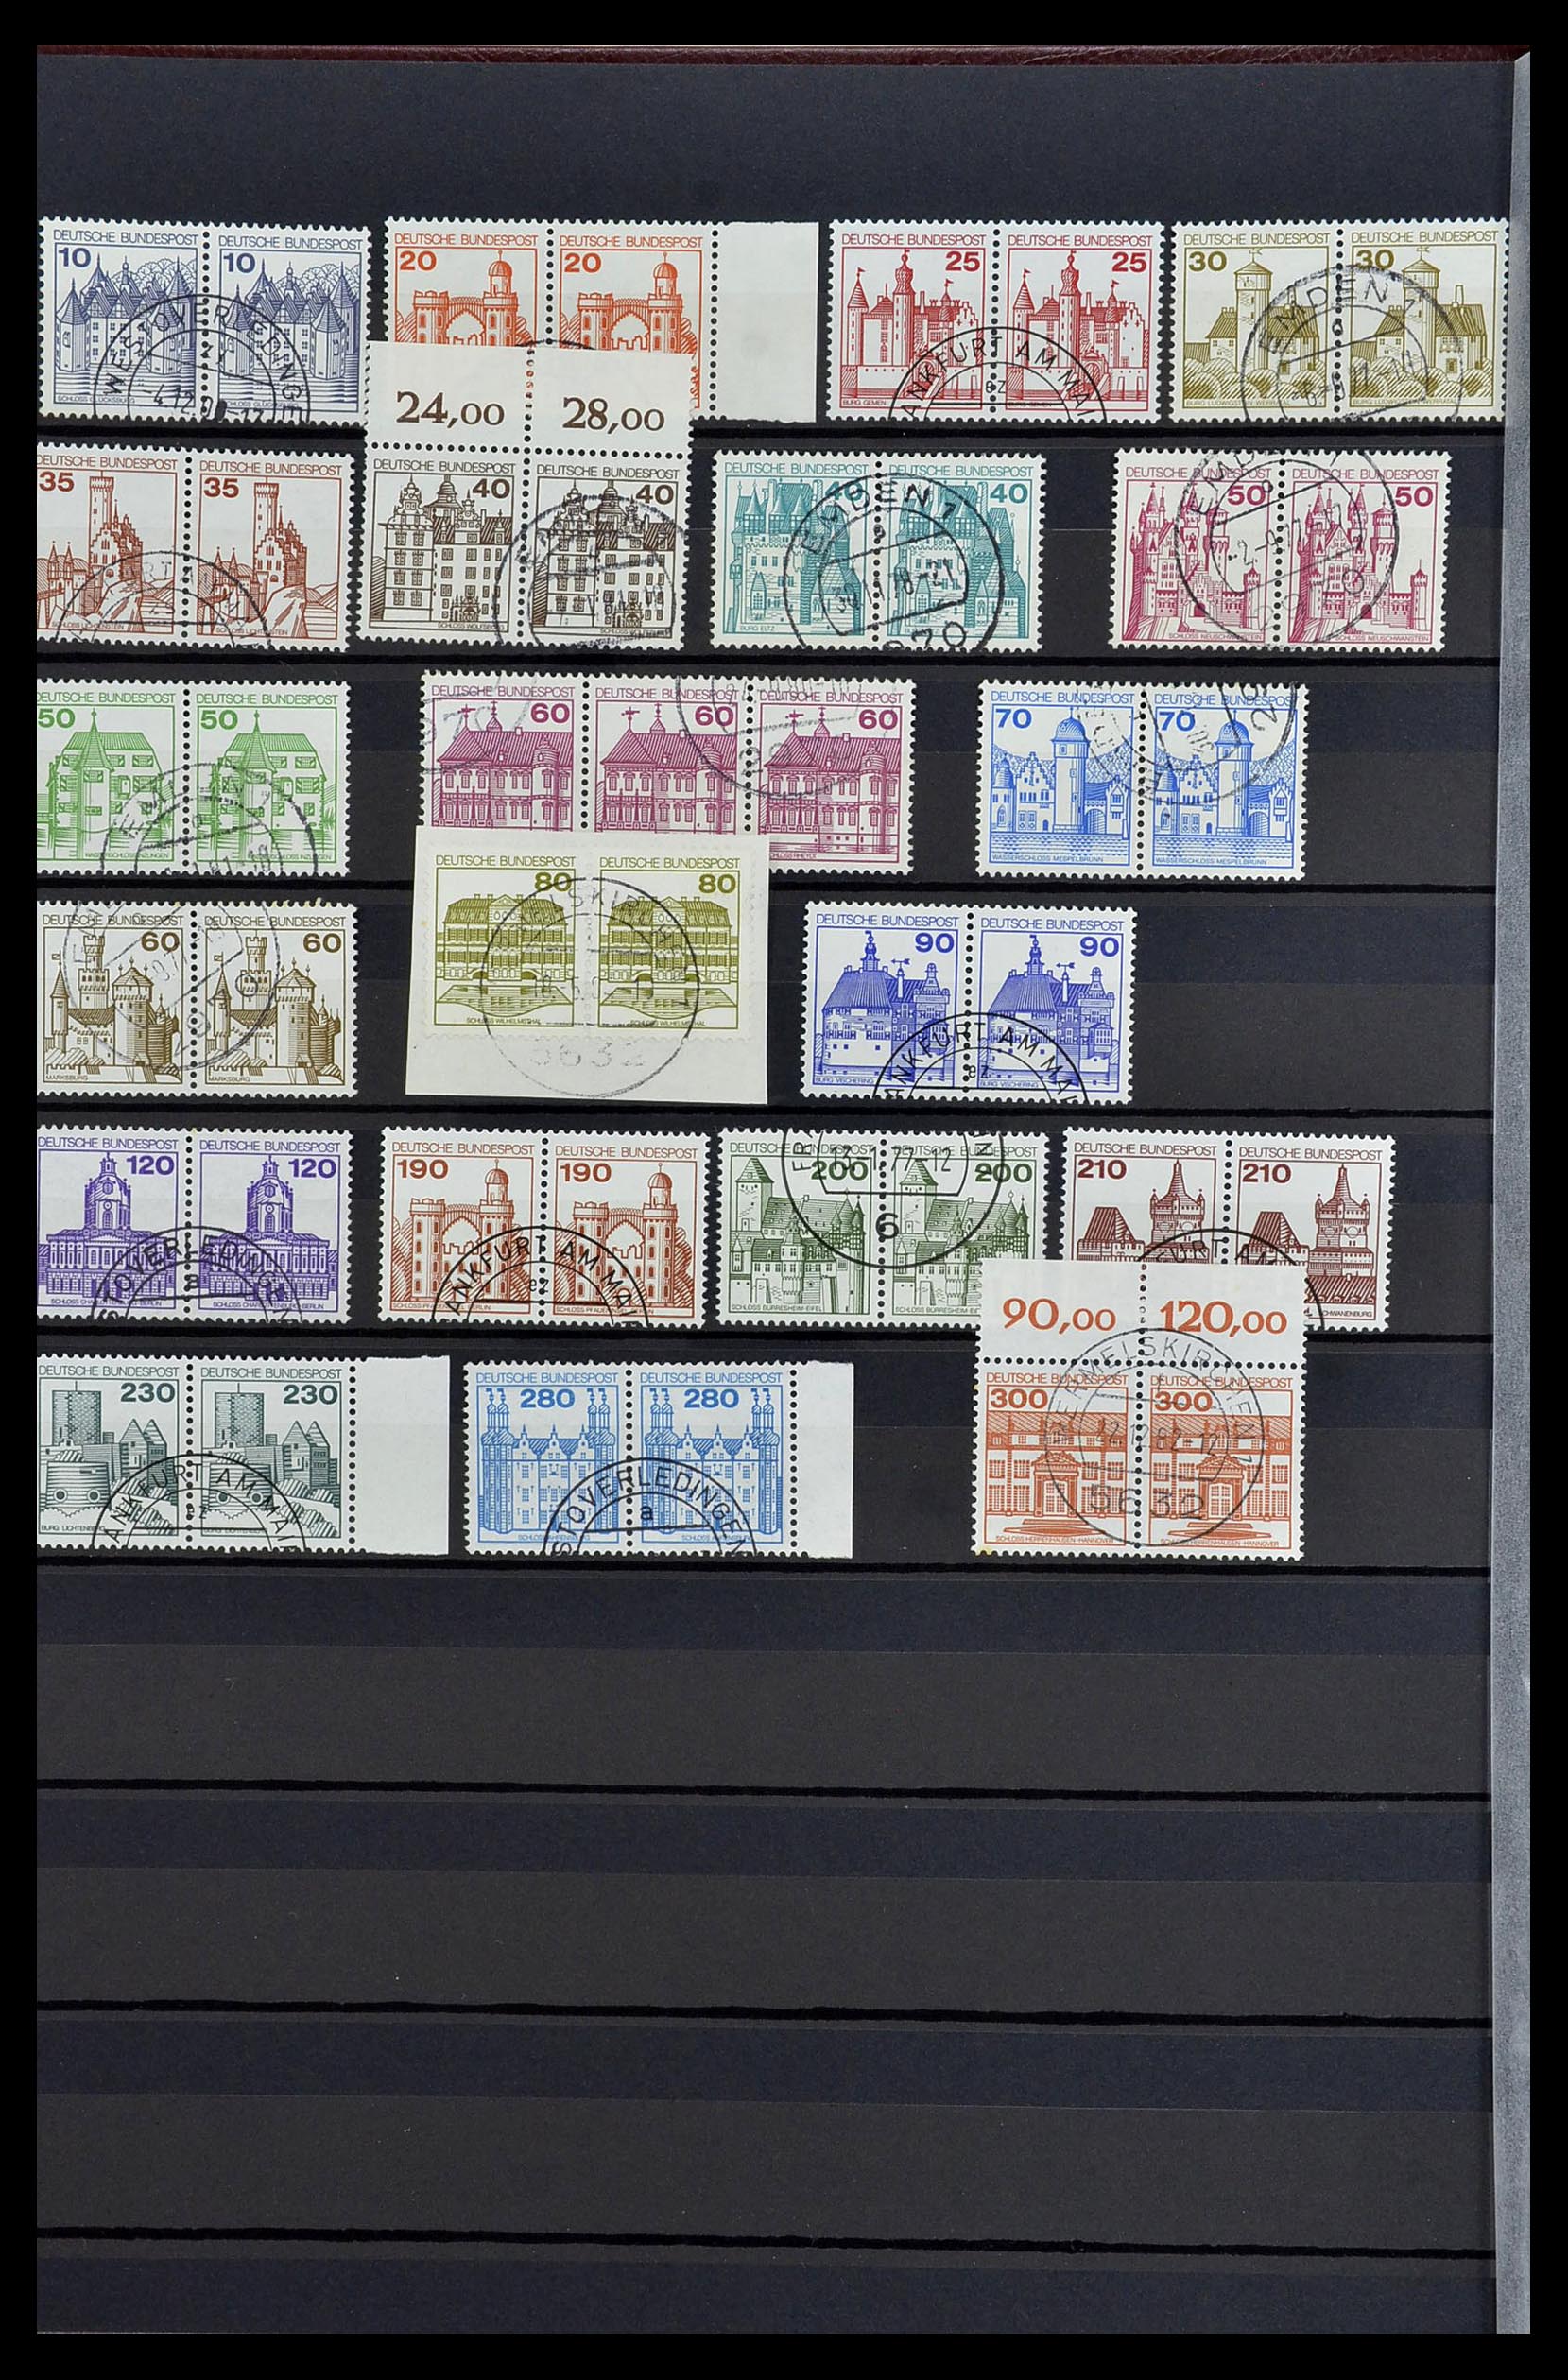 34003 042 - Stamp collection 34003 Bundespost combinations 1950-2020.